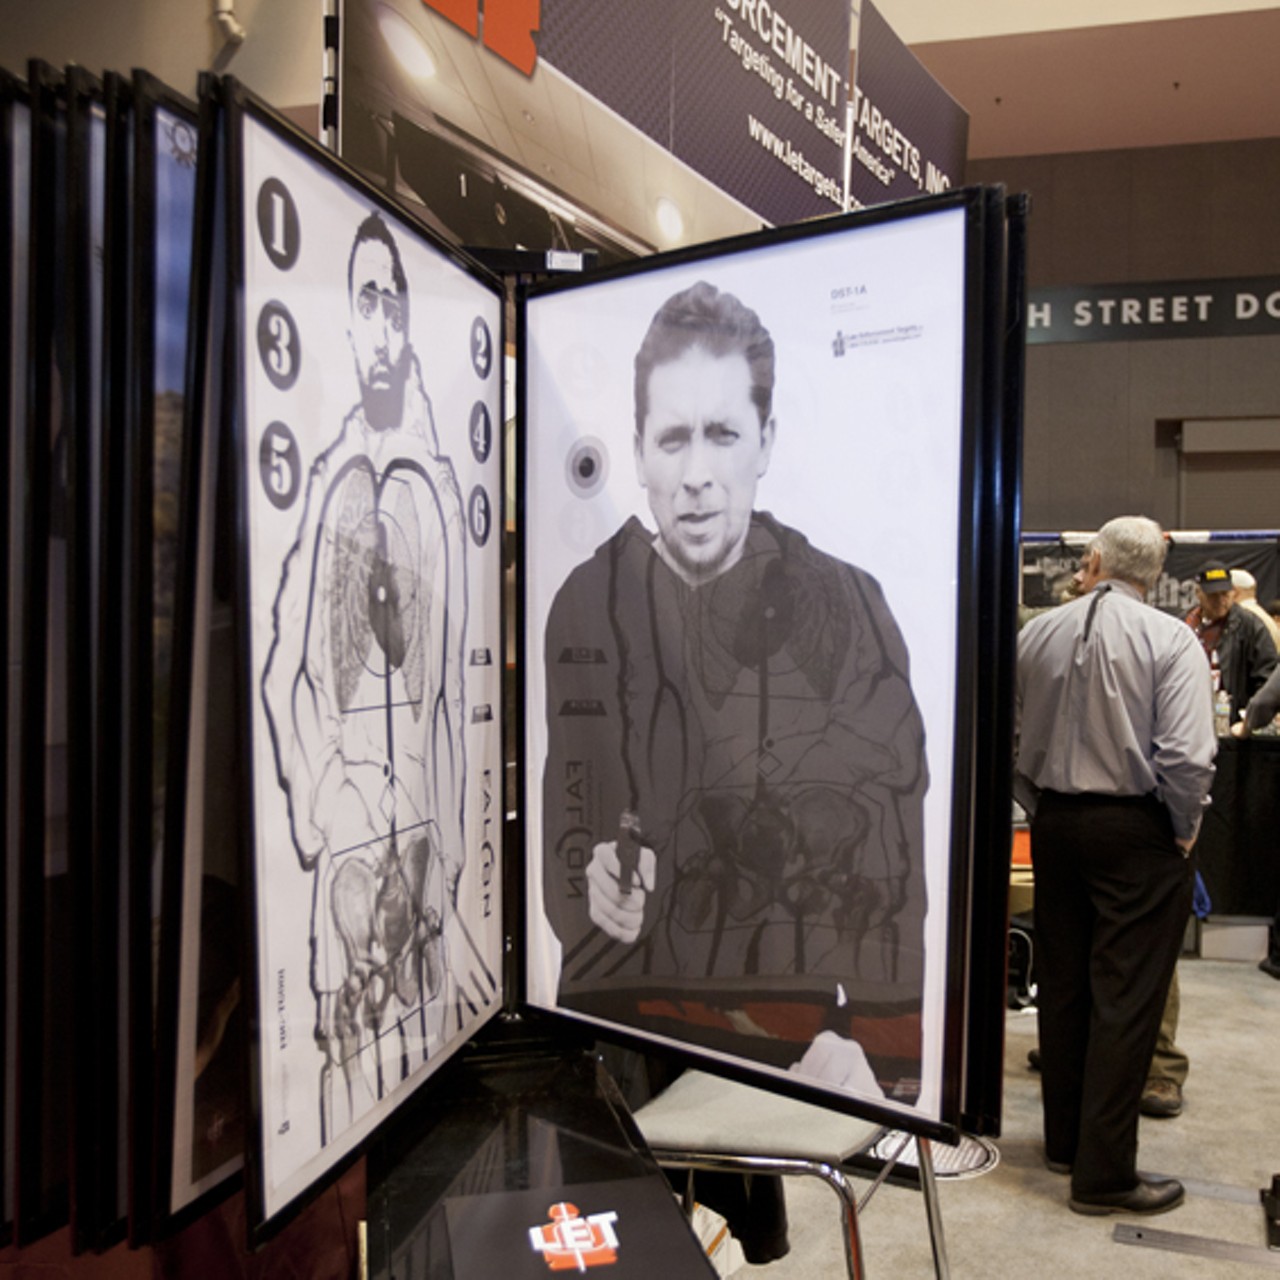 Scenes from the NRA Convention: Part 2